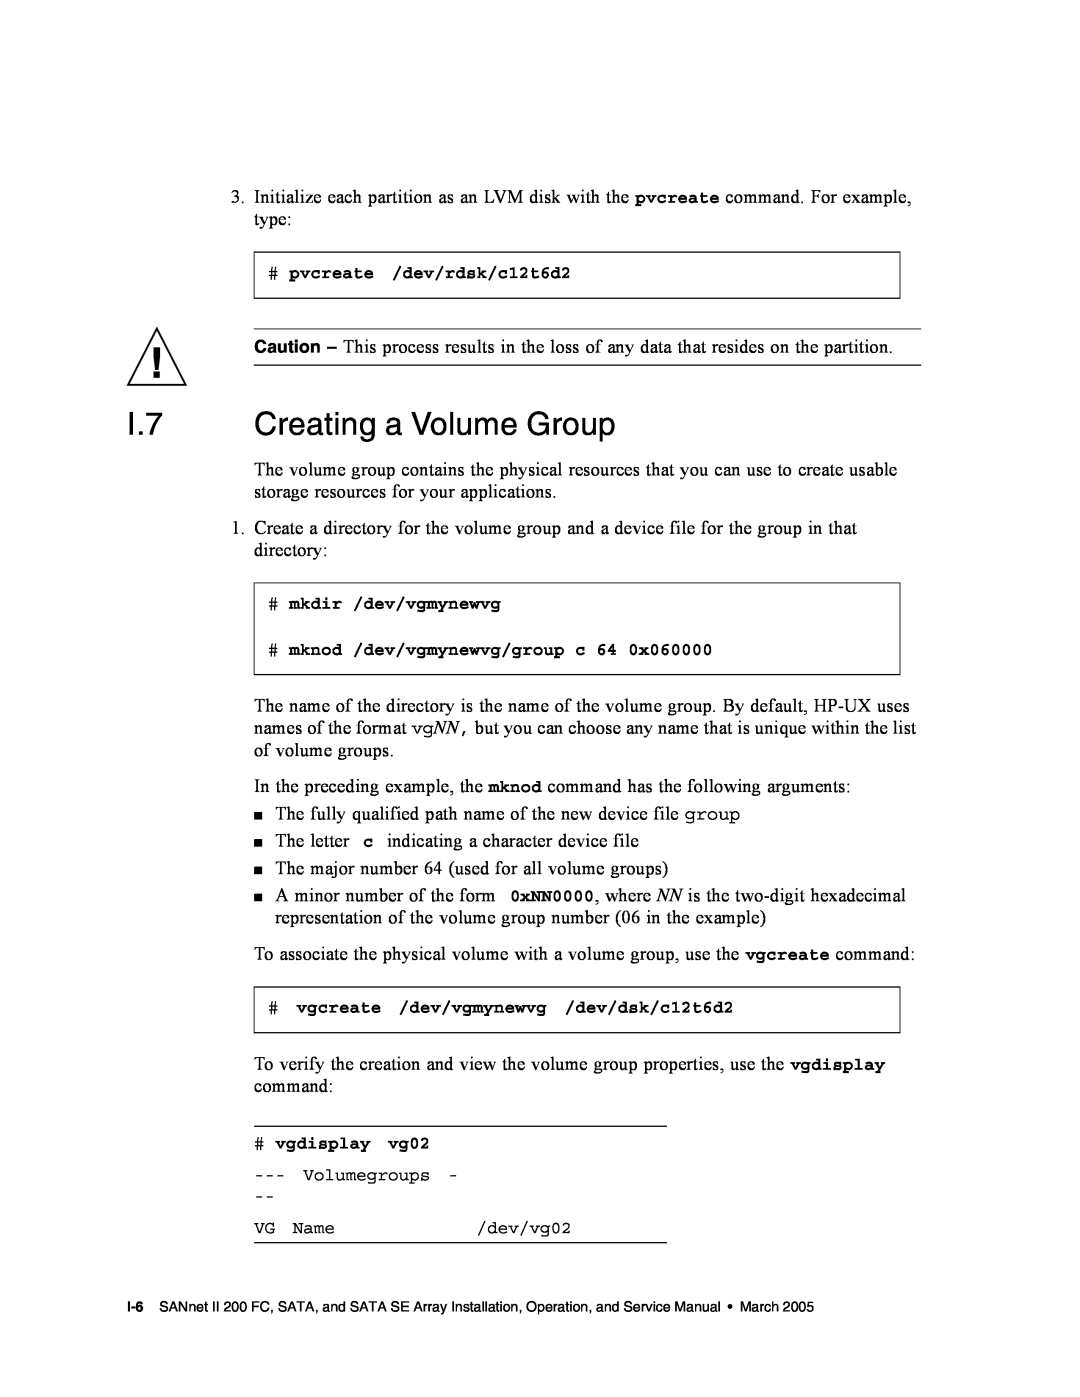 Dot Hill Systems II 200 FC service manual I.7 Creating a Volume Group 